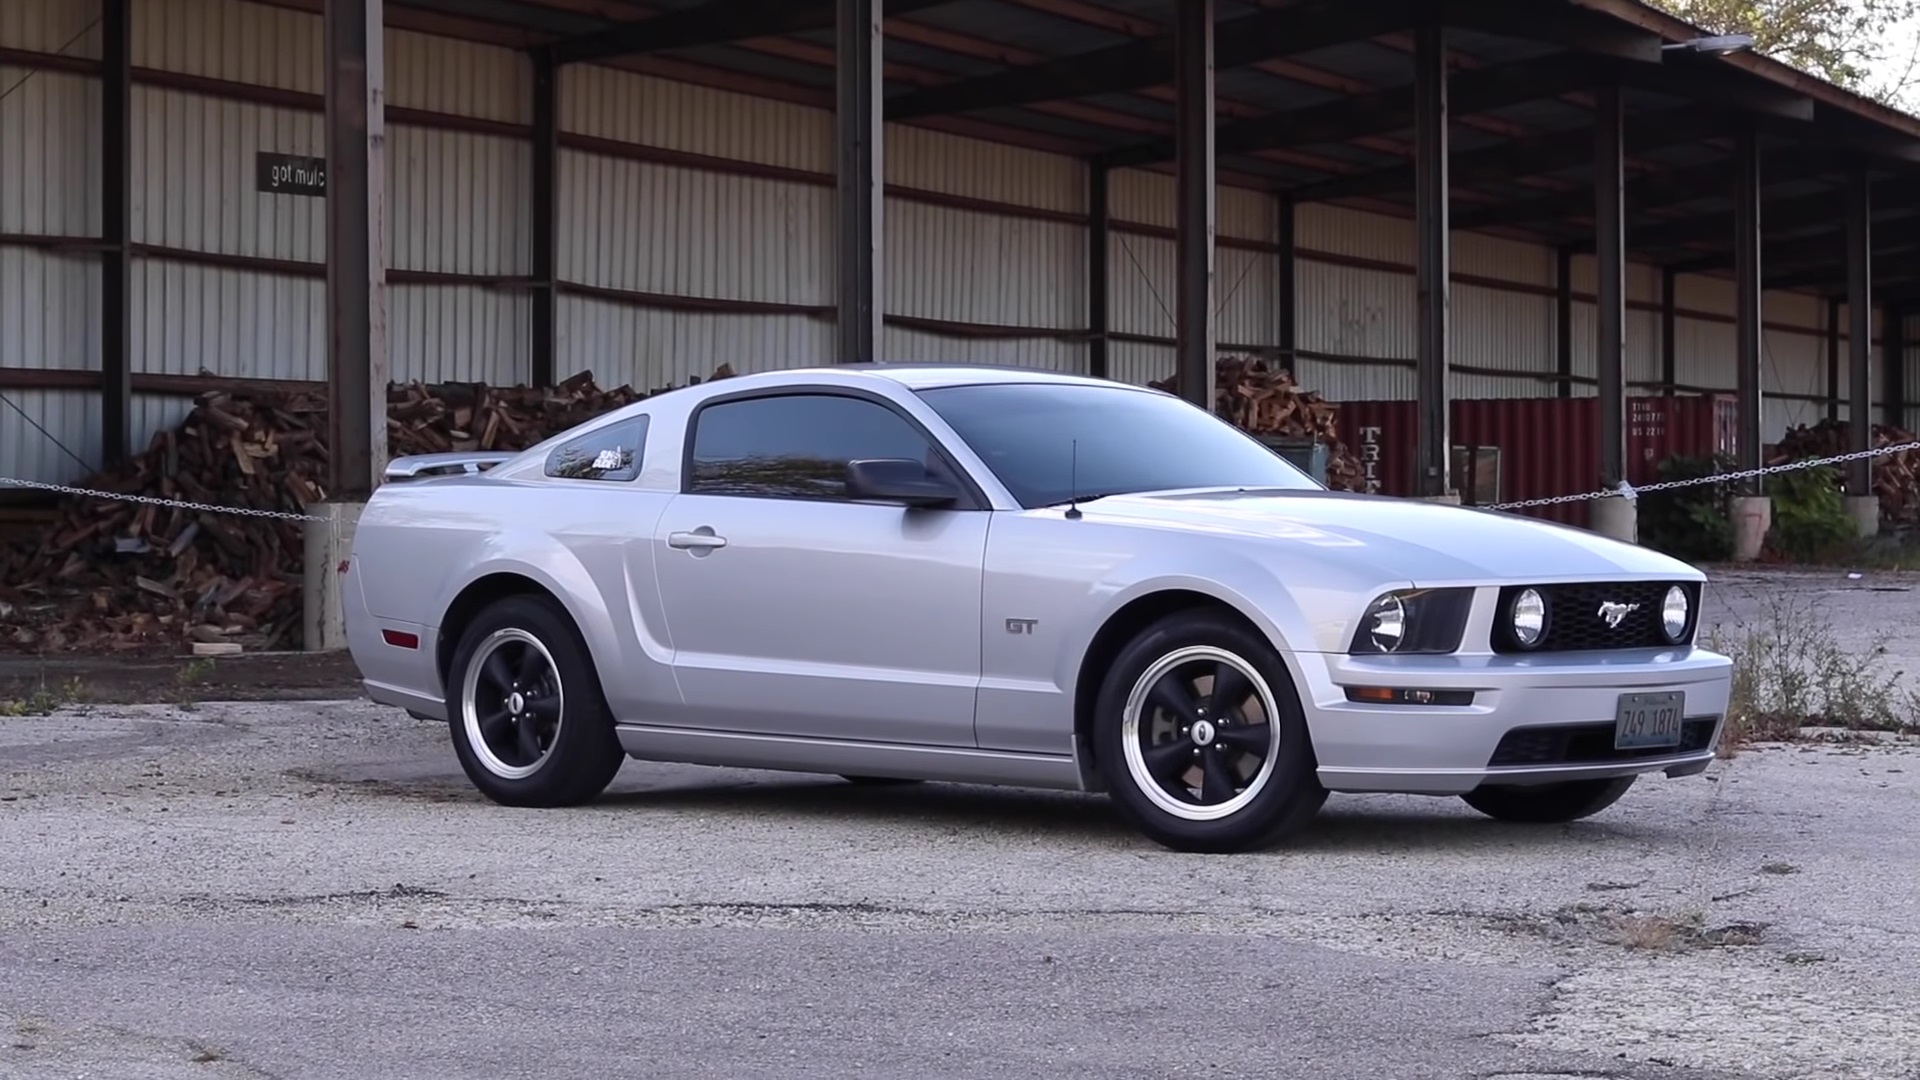 Video: 2005 Ford Mustang GT In-Depth Review